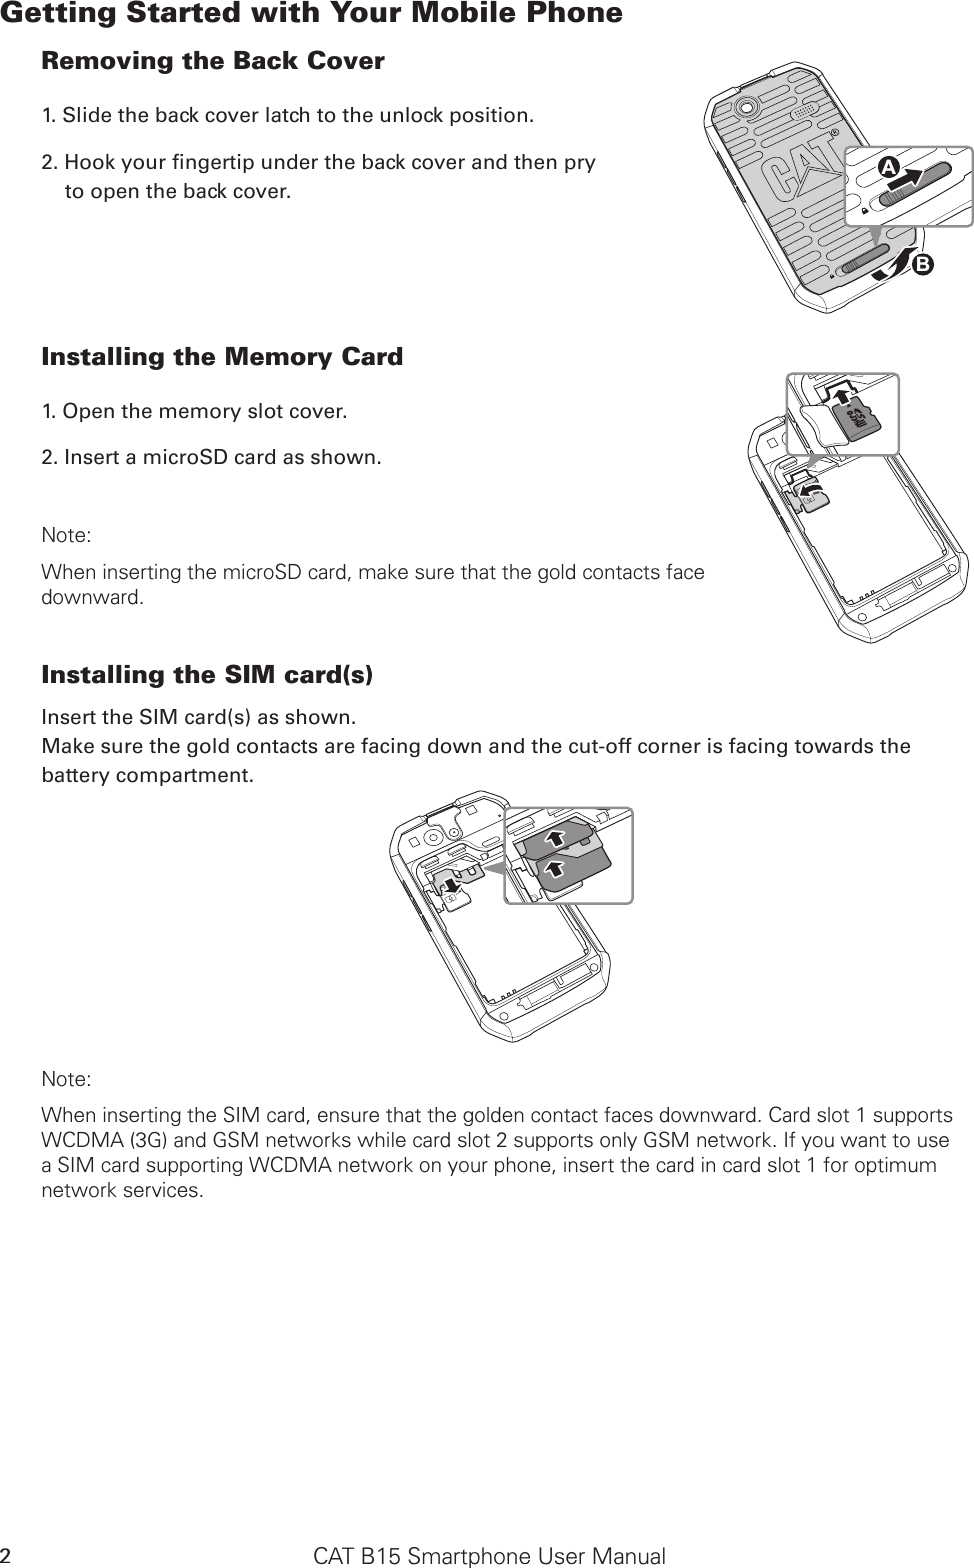 CAT B15 Smartphone User Manual2Getting Started with Your Mobile PhoneRemoving the Back Cover1. Slide the back cover latch to the unlock position. to open the back cover.Installing the Memory Card1. Open the memory slot cover.2. Insert a microSD card as shown. Note: When inserting the microSD card, make sure that the gold contacts face  downward.Installing the SIM card(s)Insert the SIM card(s) as shown. Make sure the gold contacts are facing down and the cut-off corner is facing towards the battery compartment.SD CardSIMSD CardSIMNote: When inserting the SIM card, ensure that the golden contact faces downward. Card slot 1 supports WCDMA (3G) and GSM networks while card slot 2 supports only GSM network. If you want to use a SIM card supporting WCDMA network on your phone, insert the card in card slot 1 for optimum network services. SD CardSIMABSD CardSIM